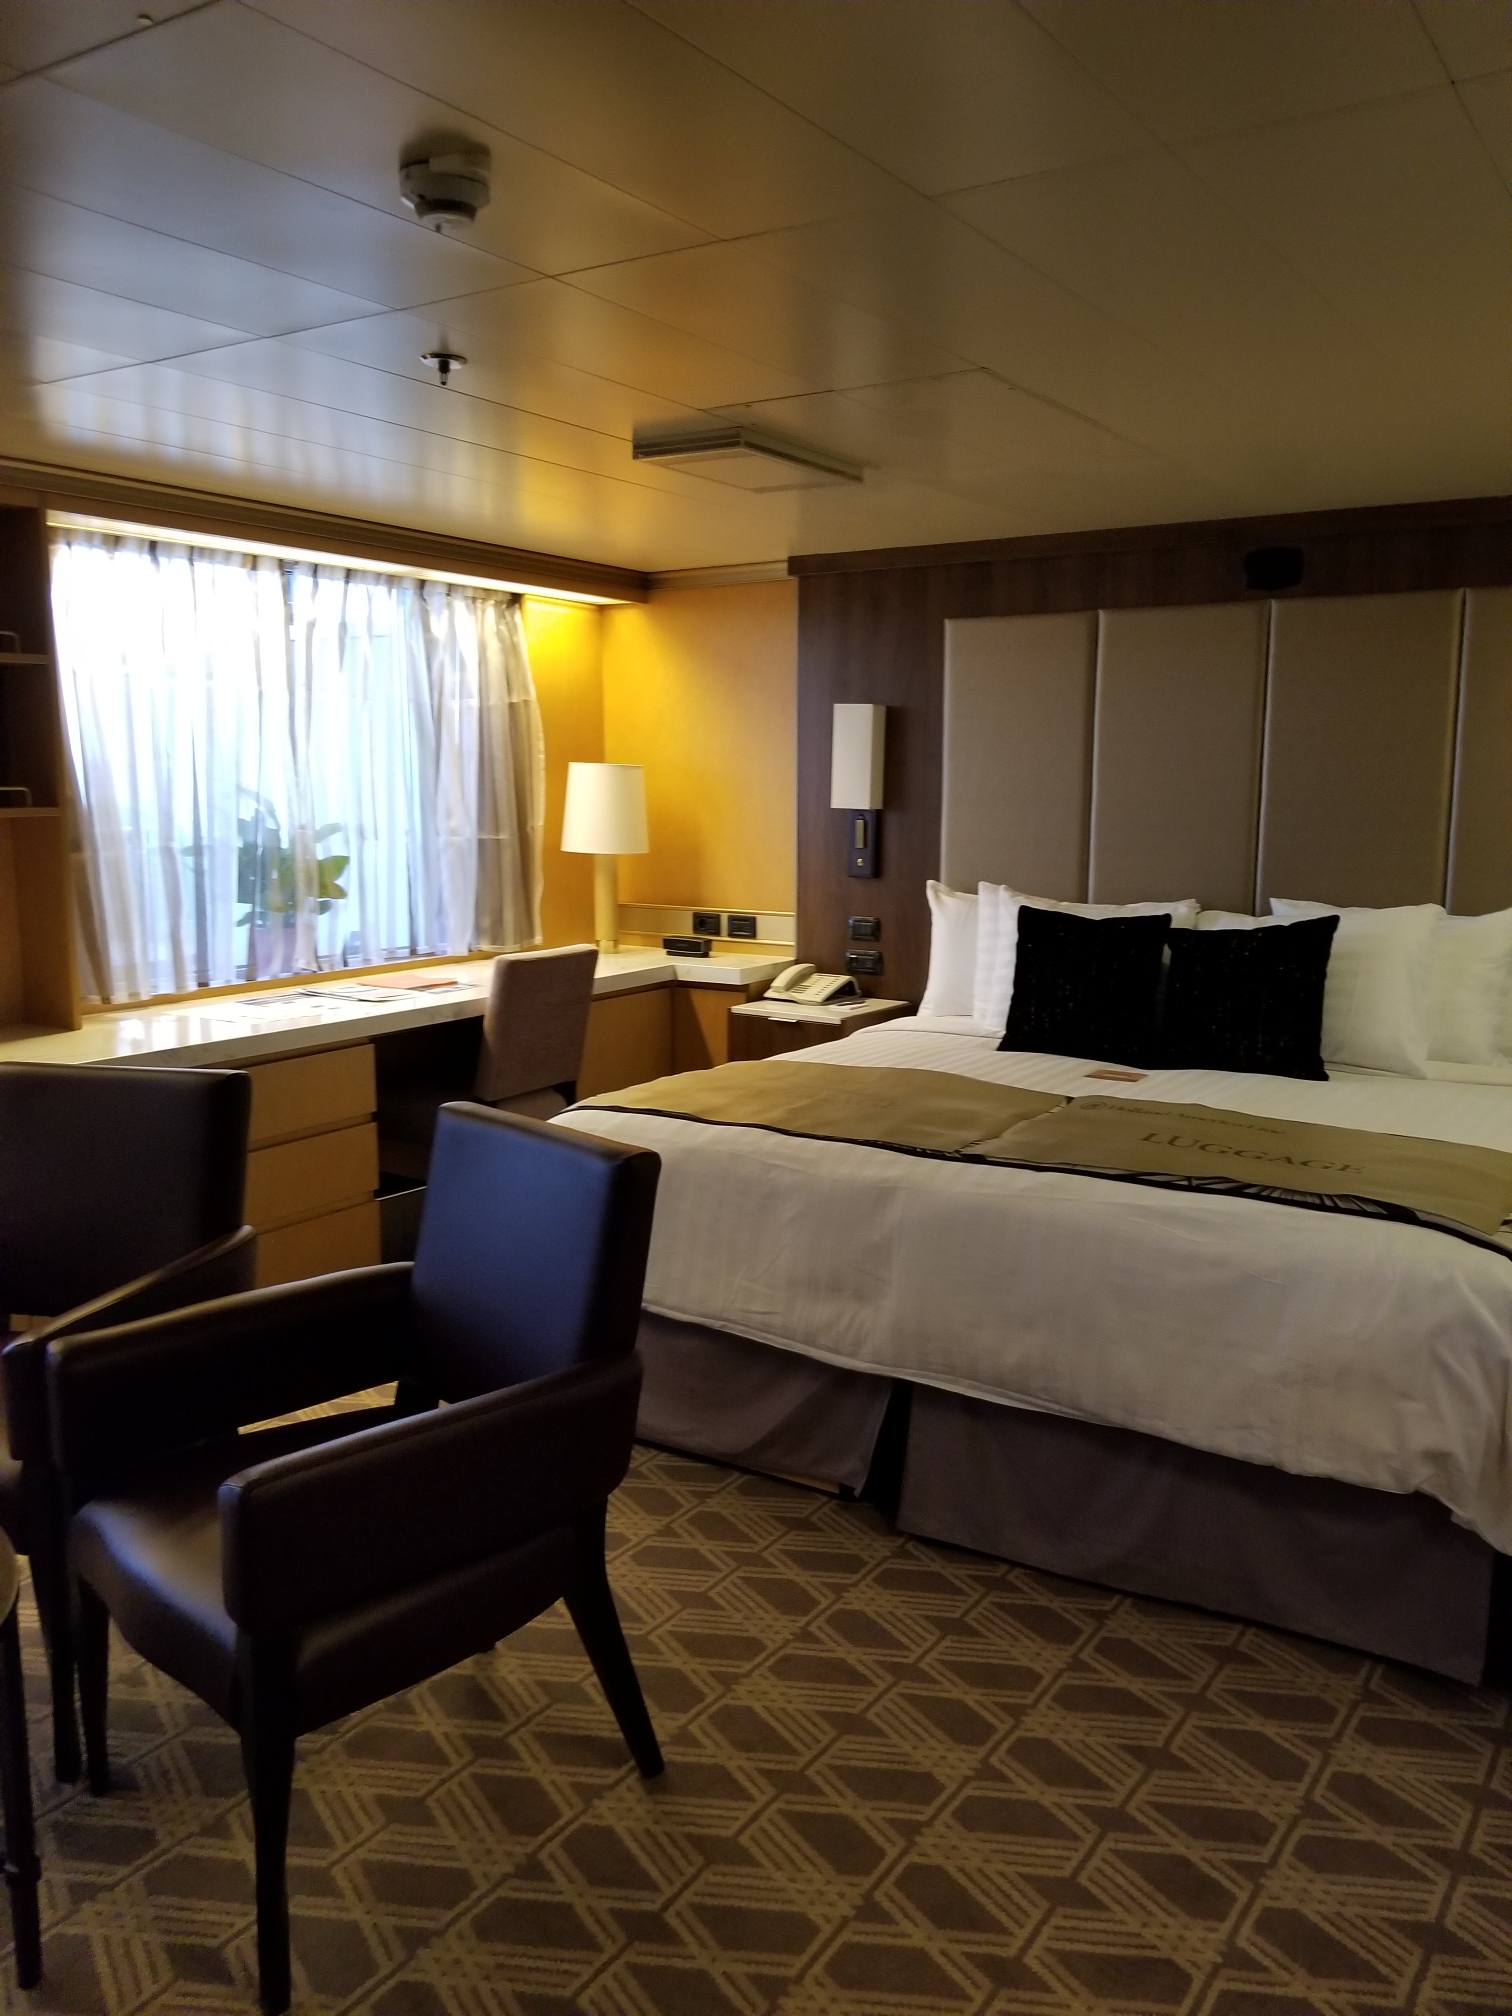 Stateroom bed